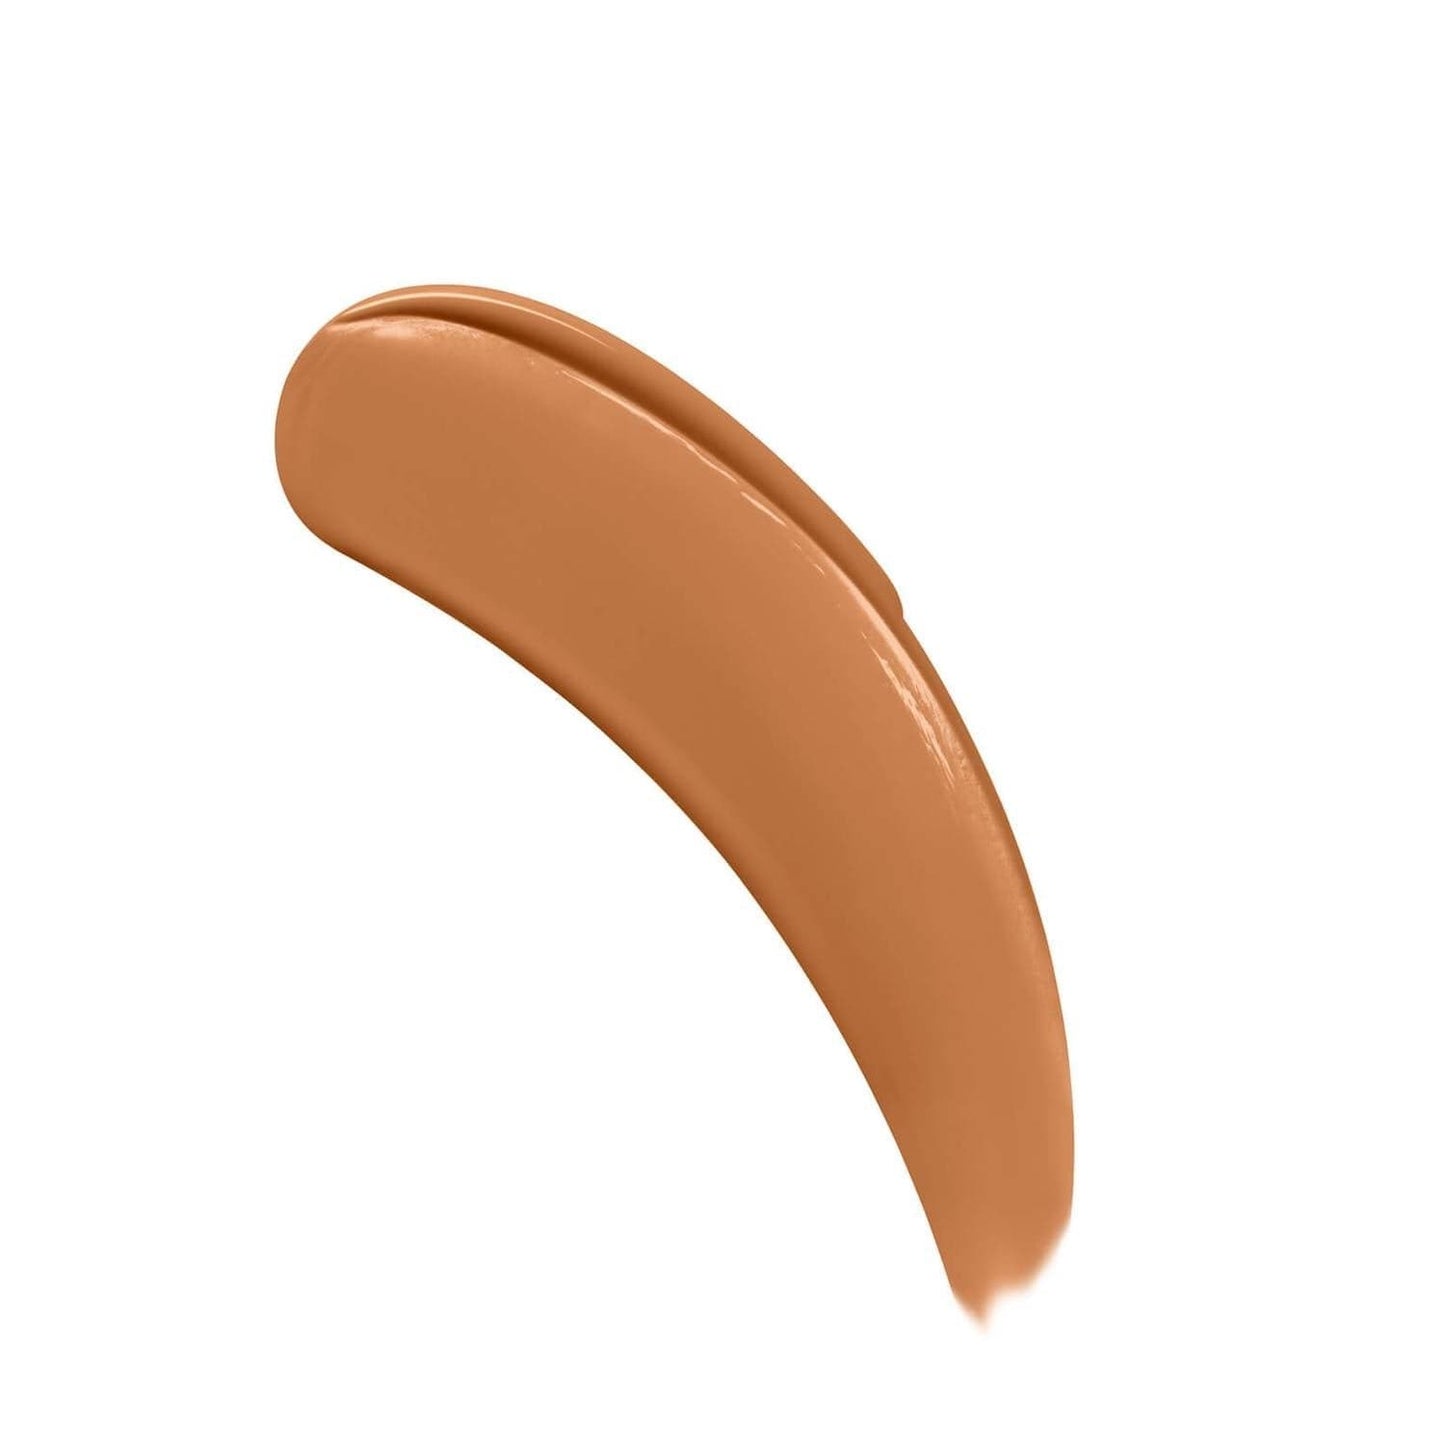 IT COSMETICS Beauty IT Cosmetics Your Skin But Better Foundation and Skincare 30ml - 44 Tan Warm